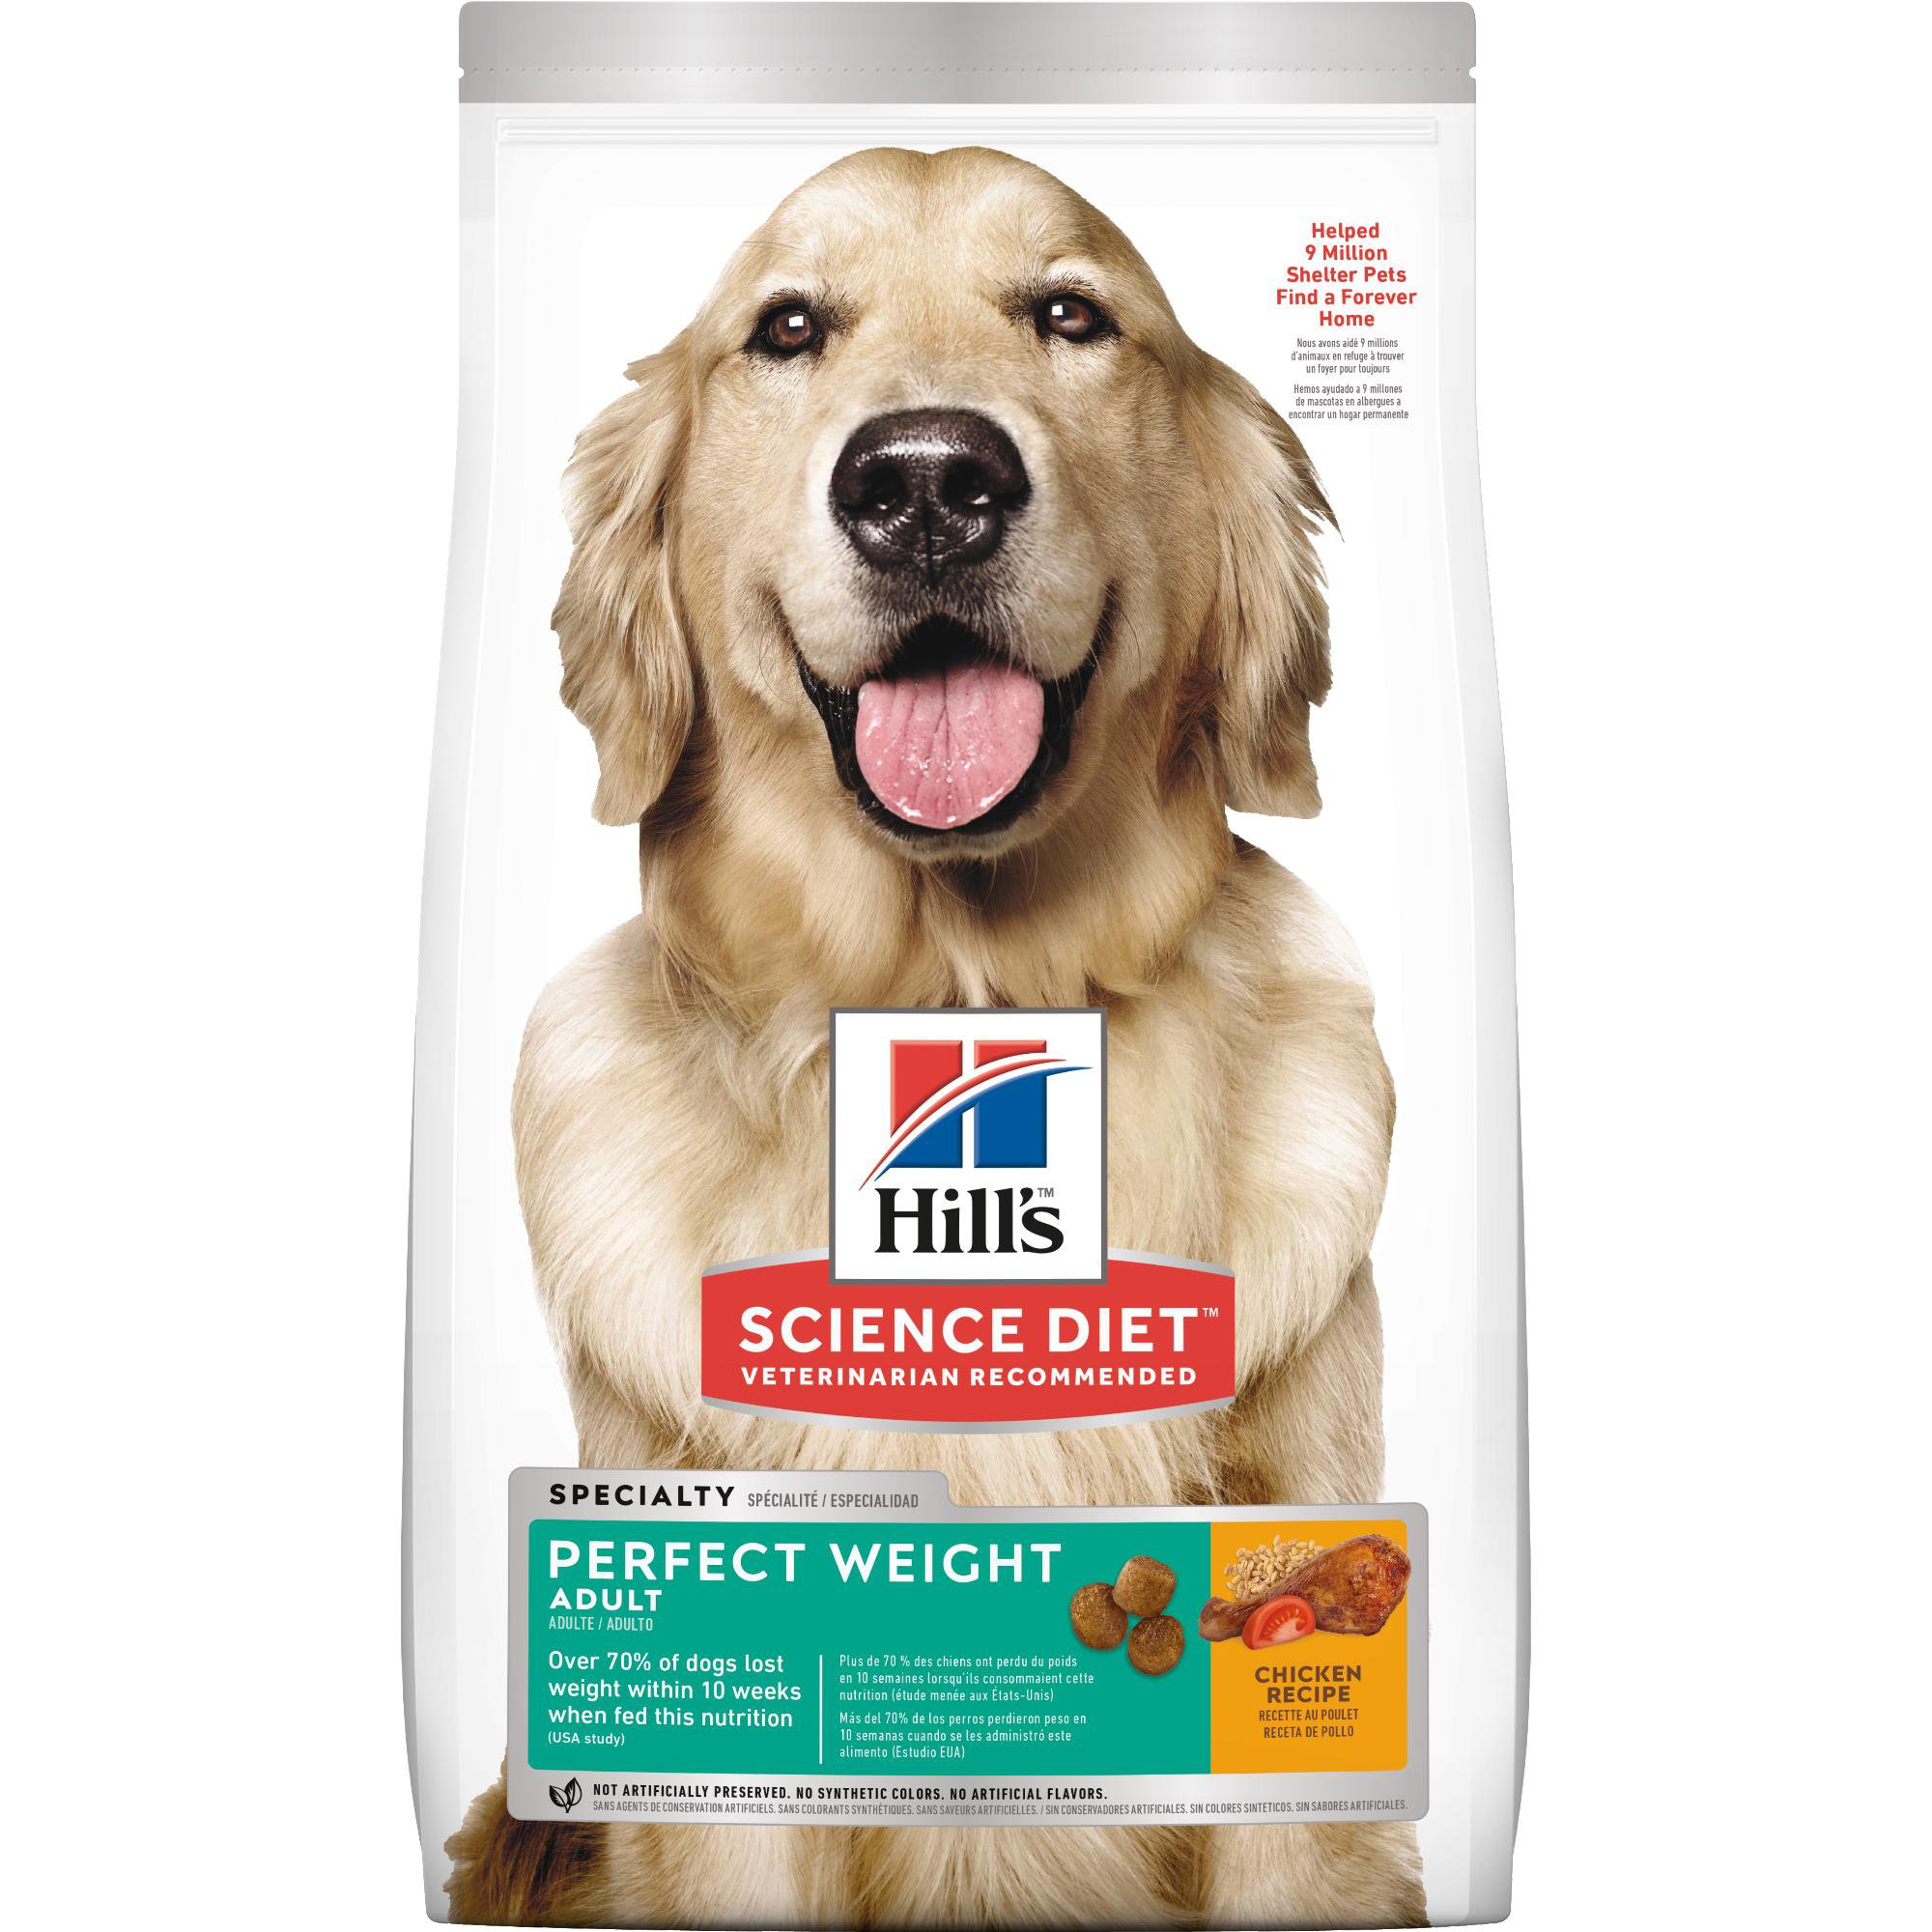 Hill's Science Diet Dog Dog Food UPC & Barcode